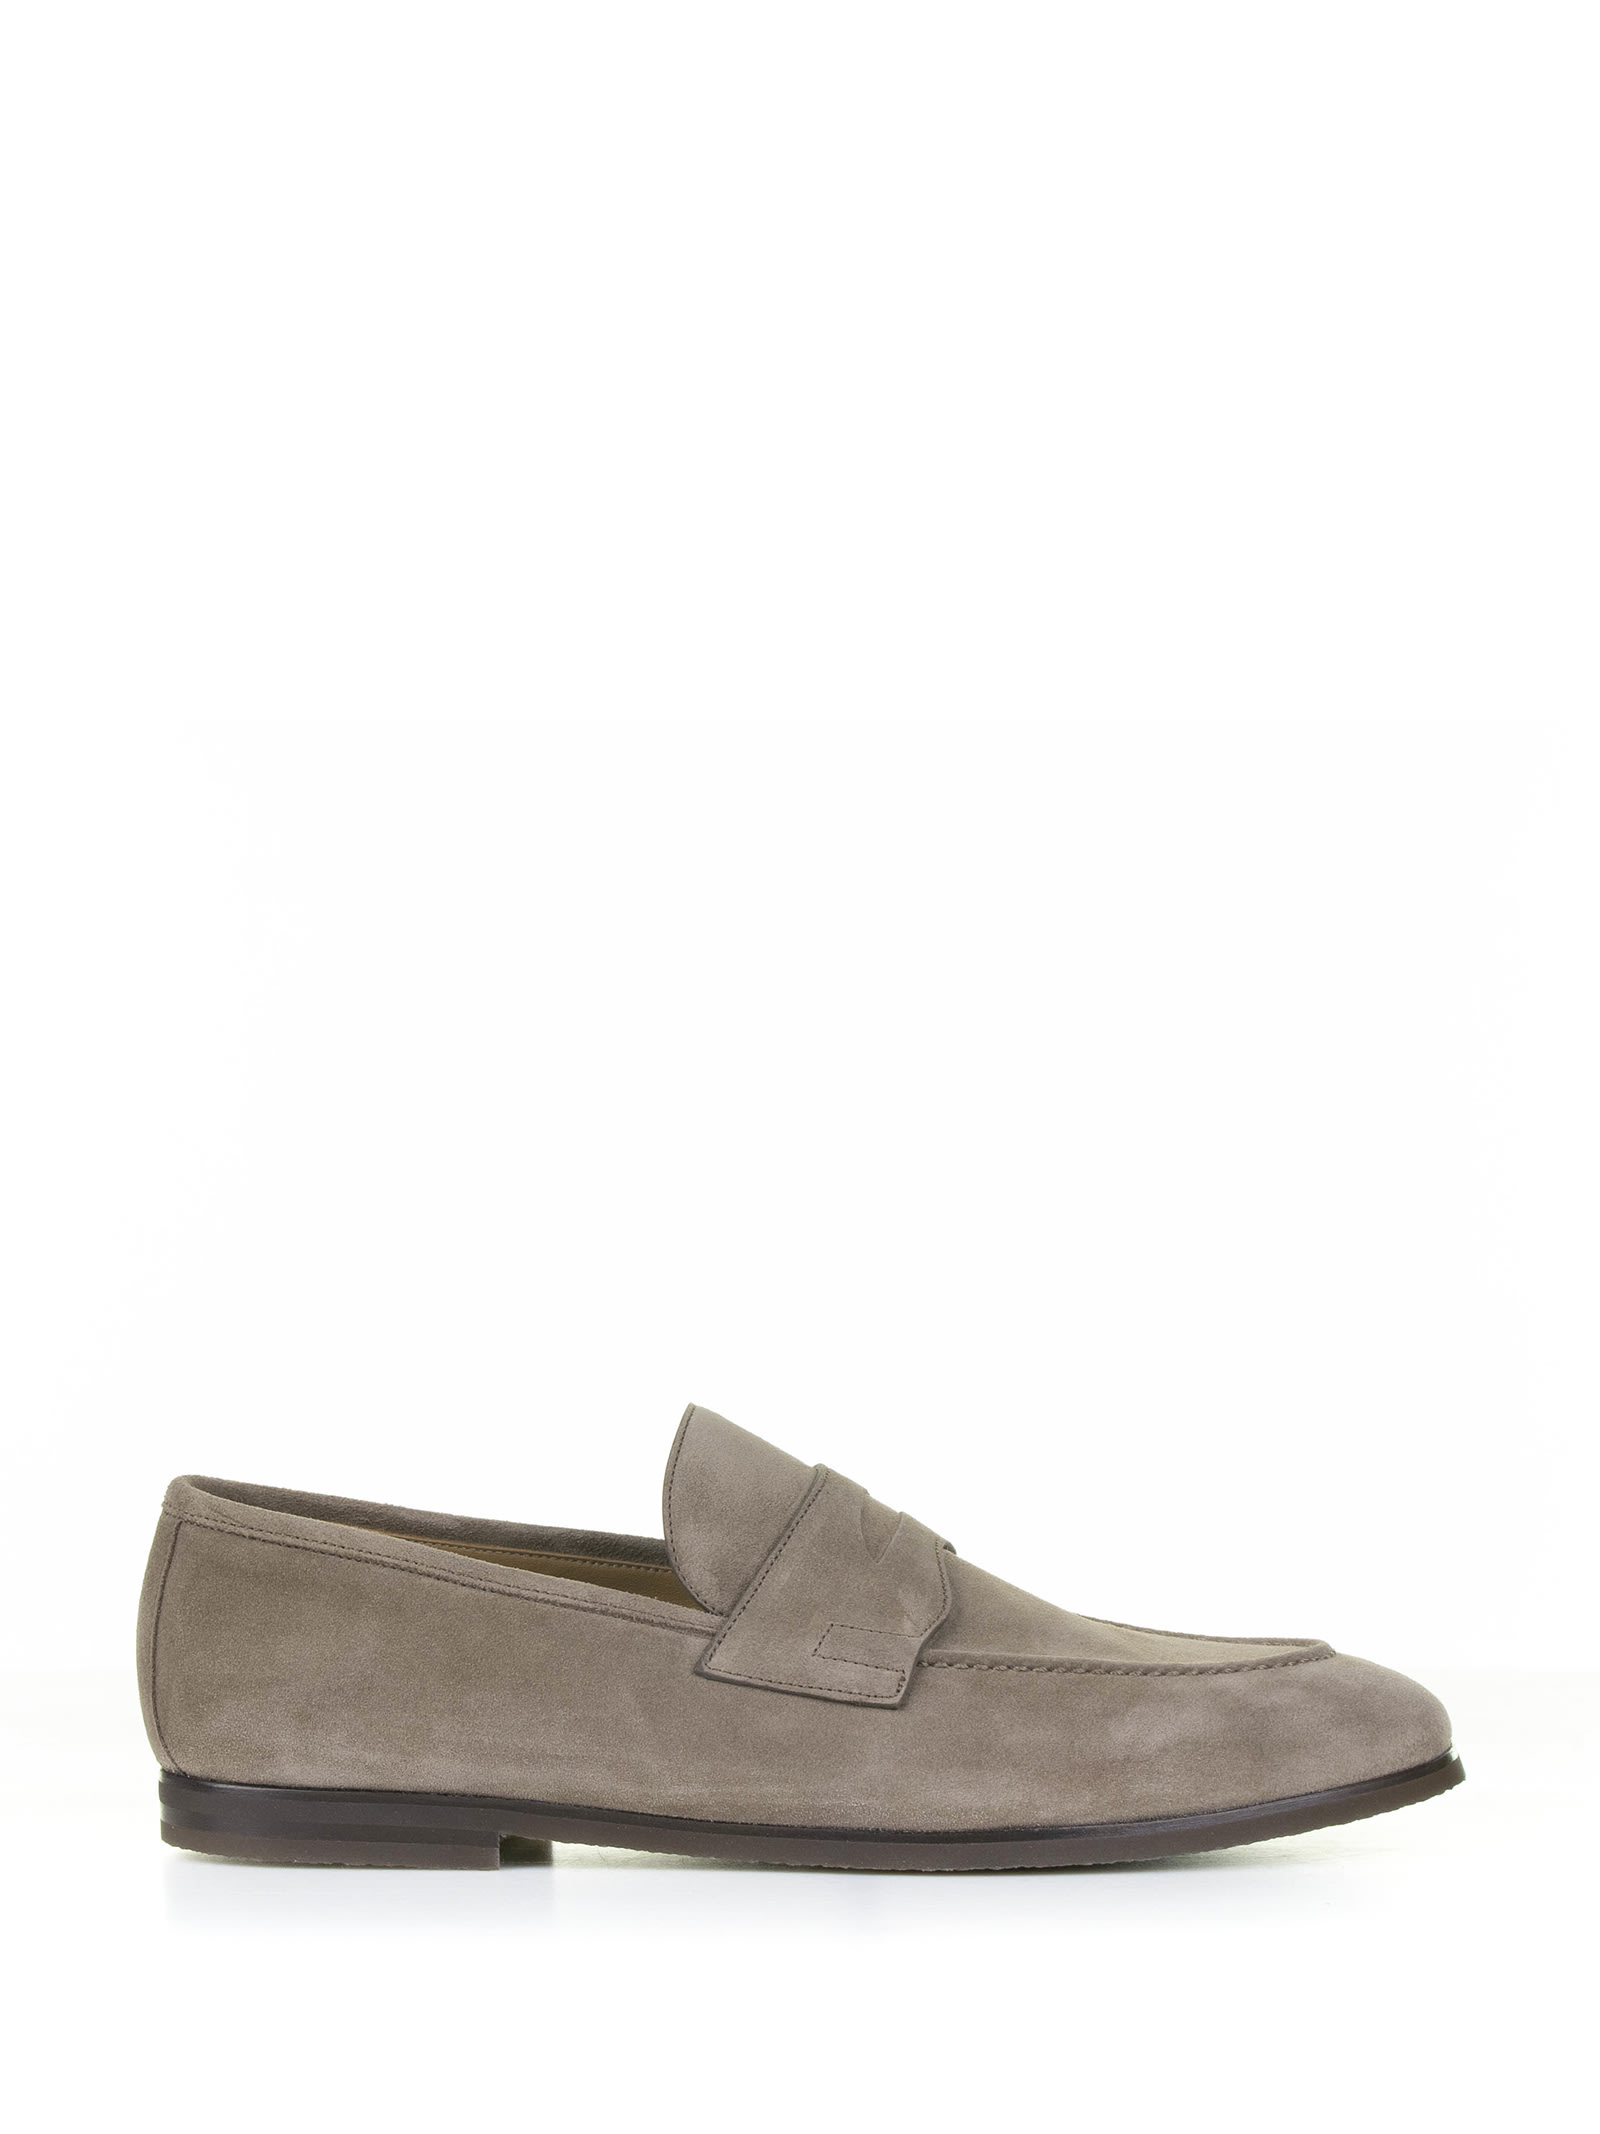 Taupe Suede Moccasin